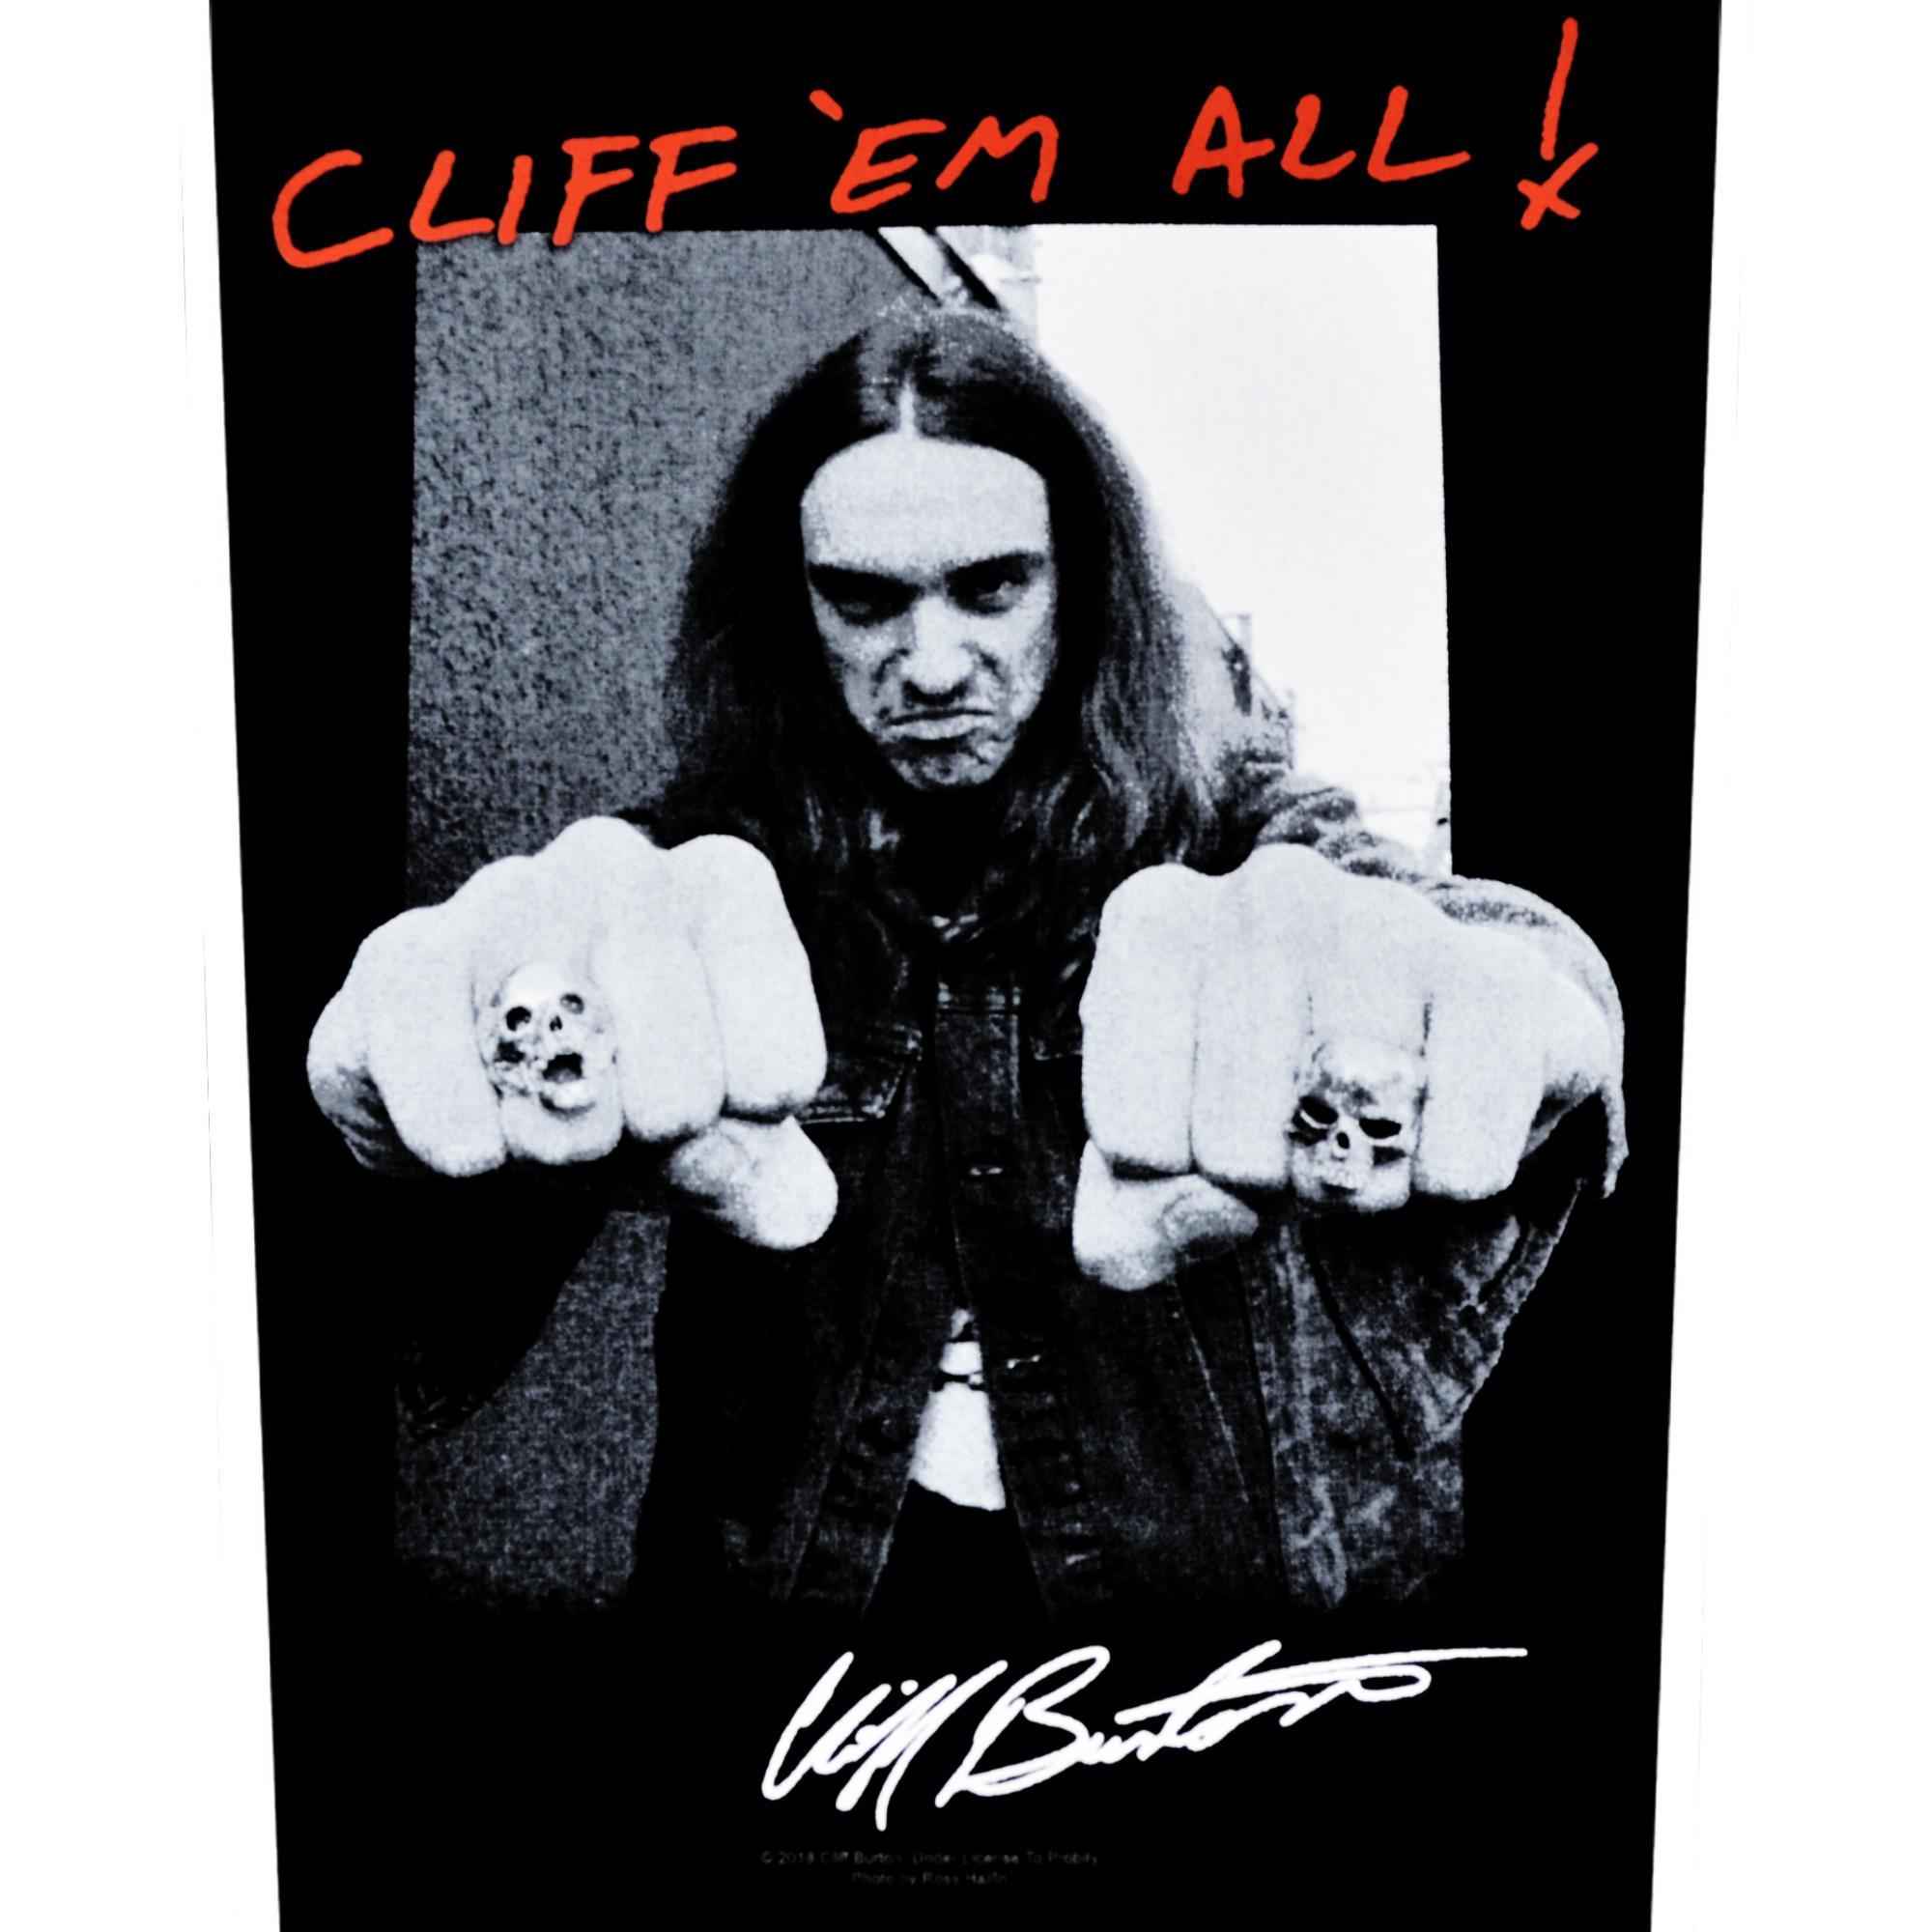 Cliff Em All Backpatch